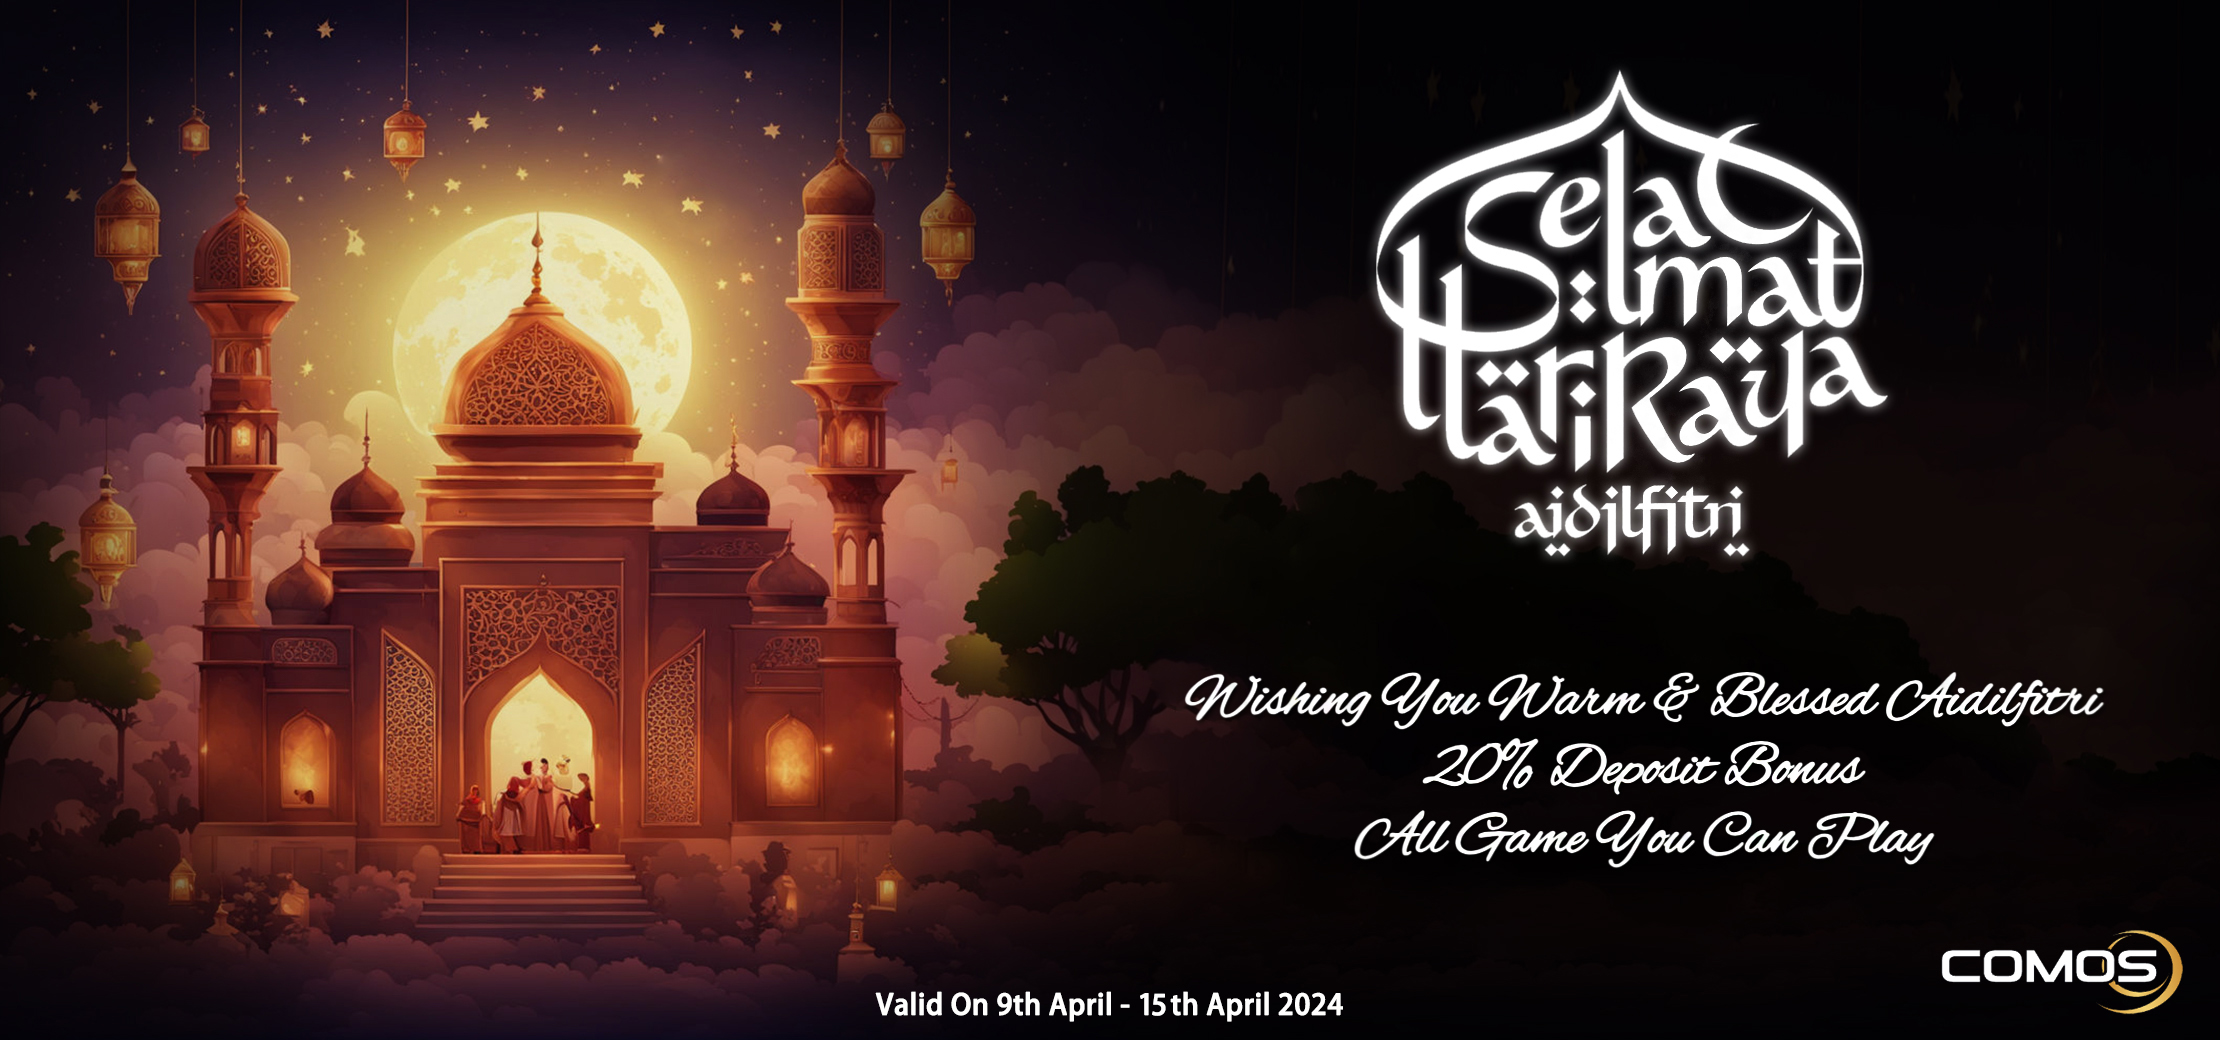 Wishing You Warm & Blessed Aidilfitri 20% Deposit Bonus All Game You Can Play ( Valid On 9th April - 15th April 2024 )